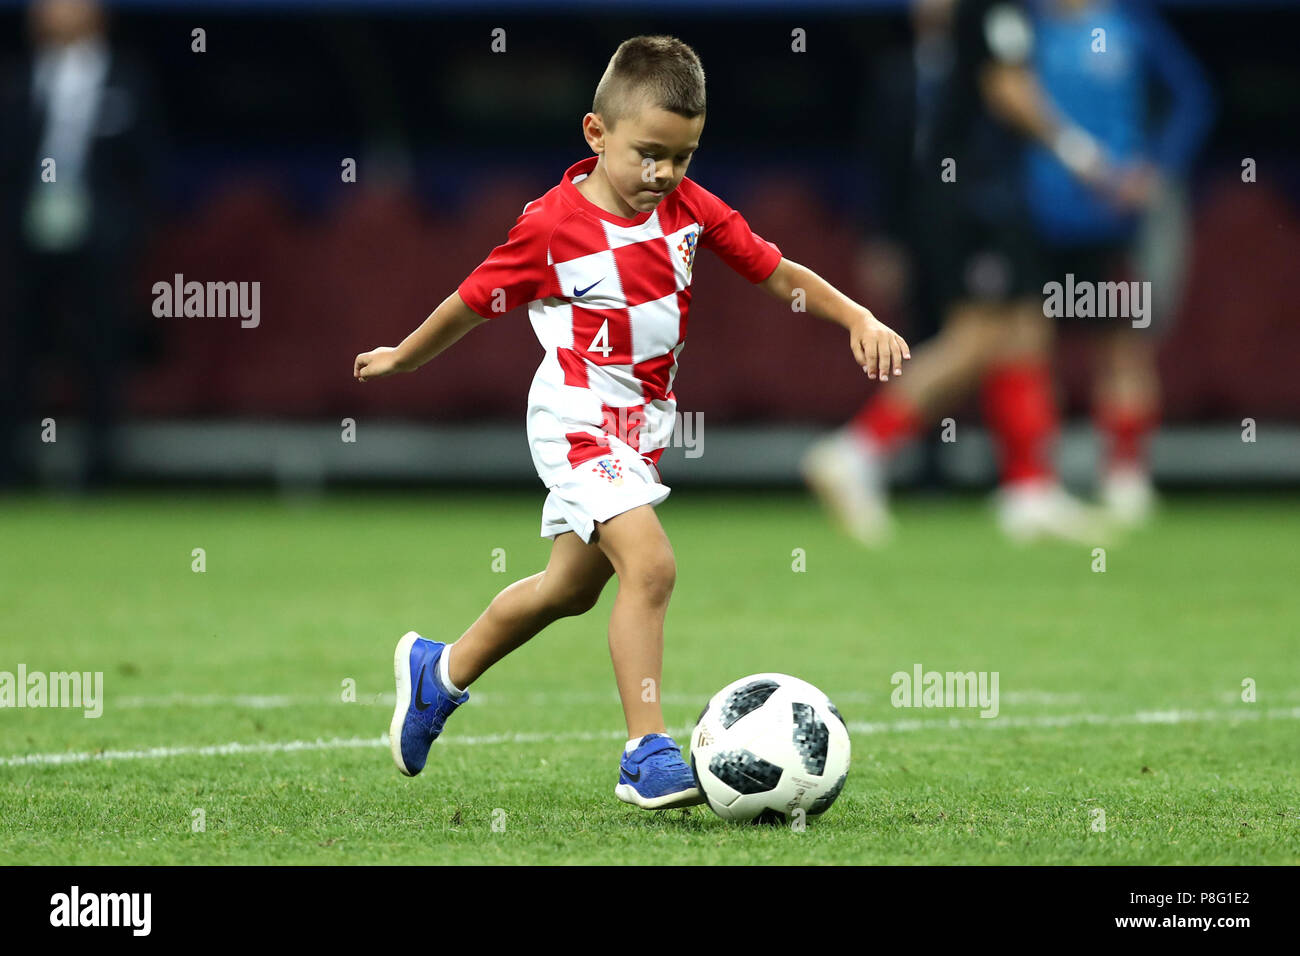 A young croatia fan wearing the shirt of Croatia's Ivan Perisic on the pitch after the final whistle of the FIFA World Cup, Semi Final match at the Luzhniki Stadium, Moscow. PRESS ASSOCIATION Photo. Picture date: Wednesday July 11, 2018. See PA story WORLDCUP Croatia. Photo credit should read: Tim Goode/PA Wire. Stock Photo